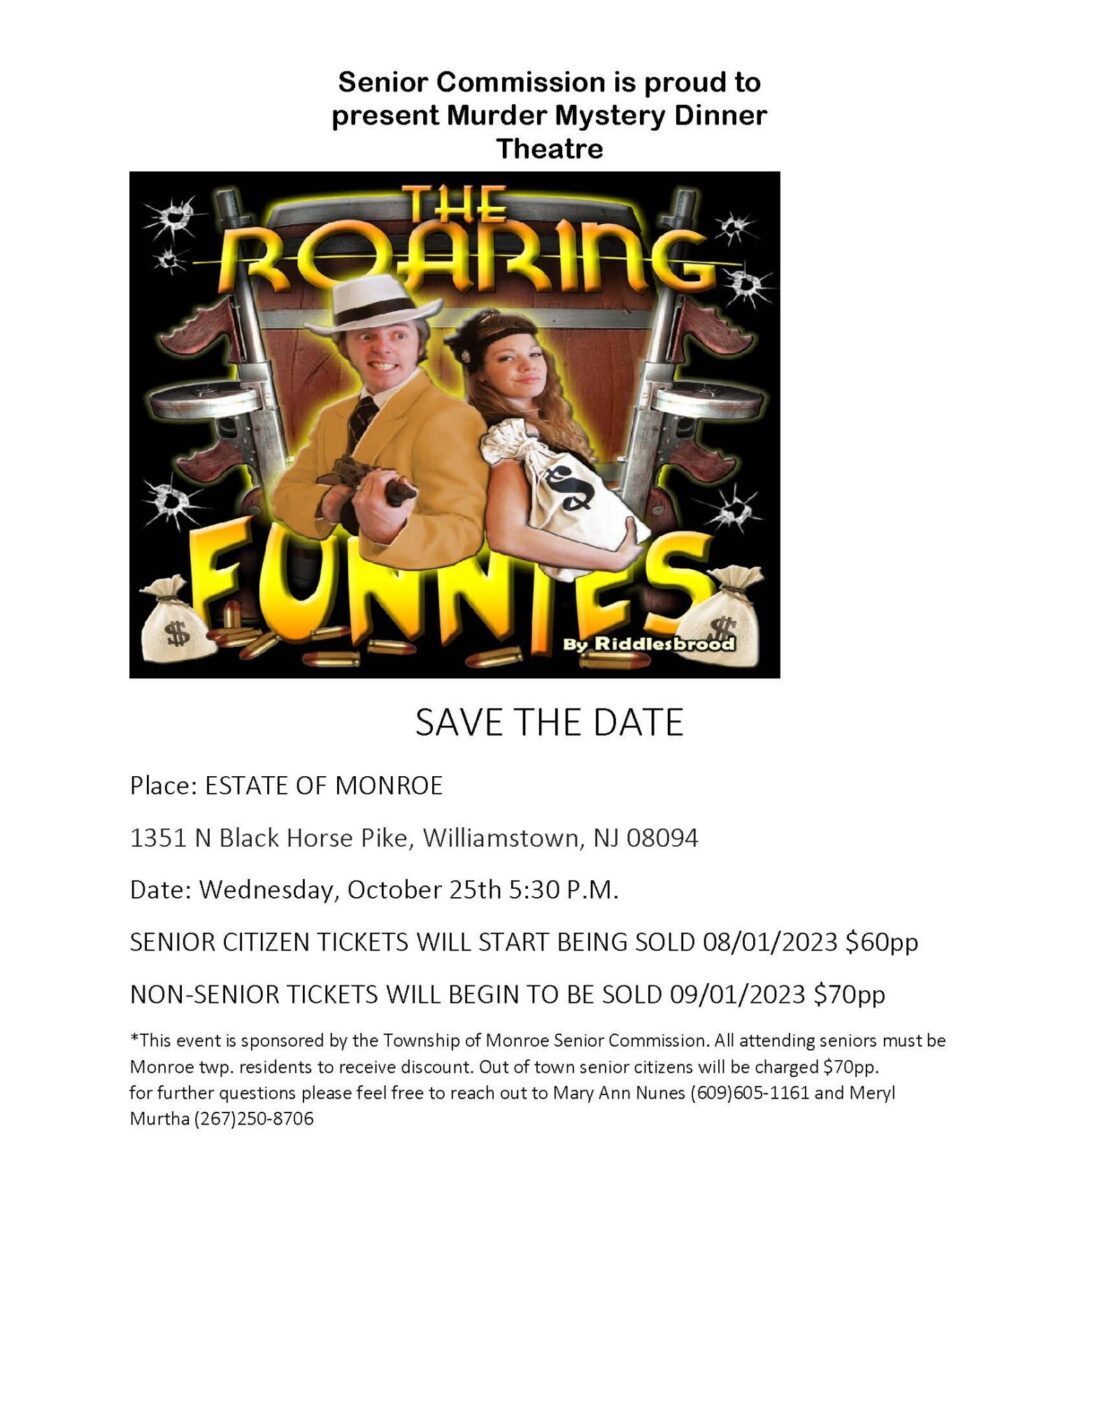 SAVE THE DATE Roaring 20's